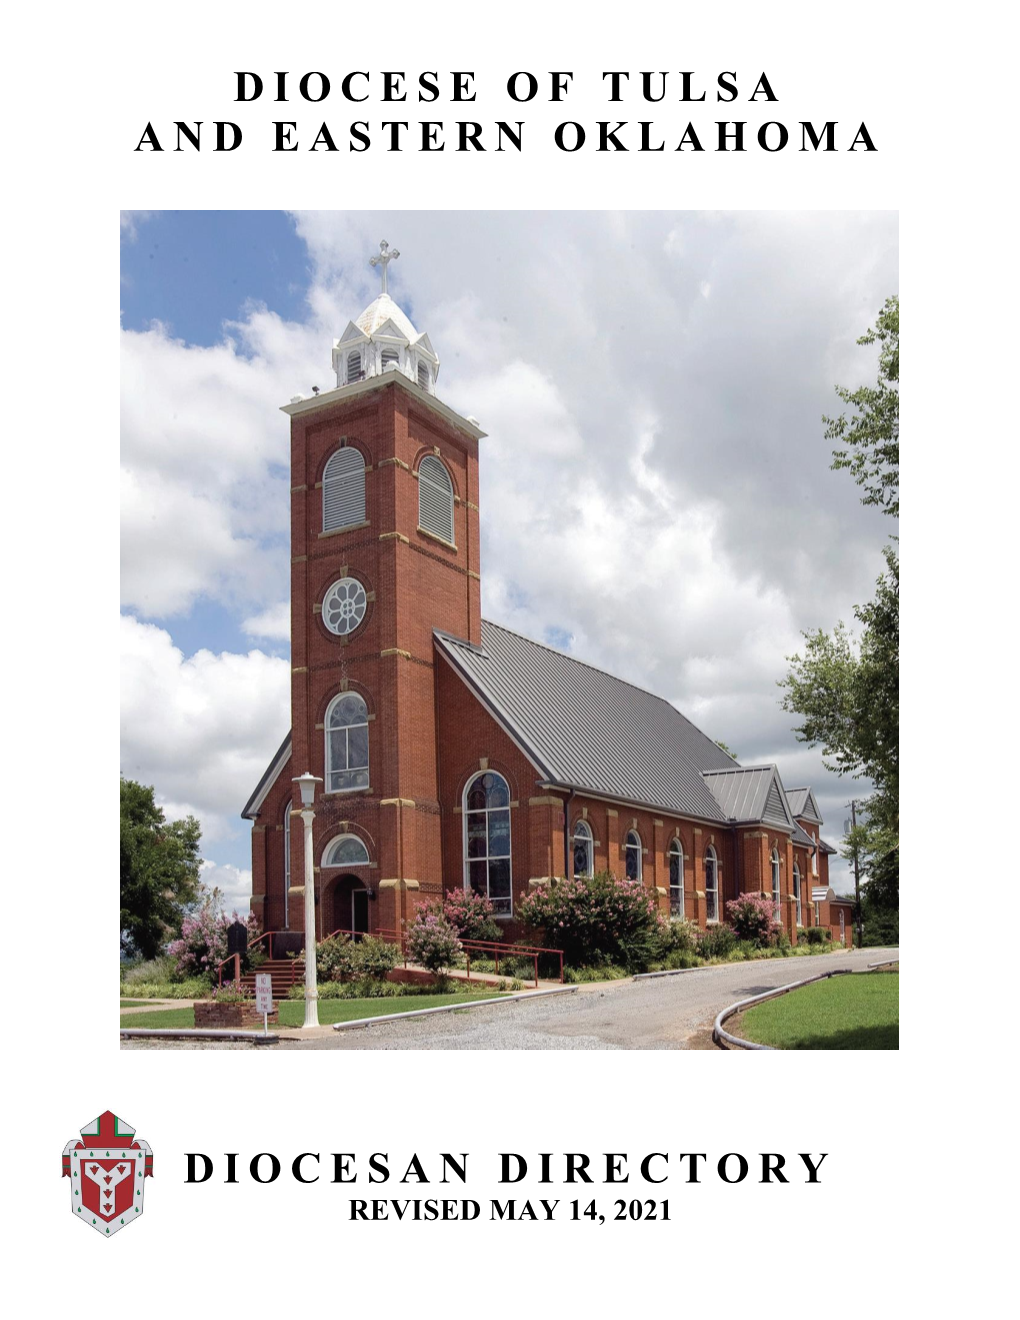 Diocesan Directory Revised May 14, 2021